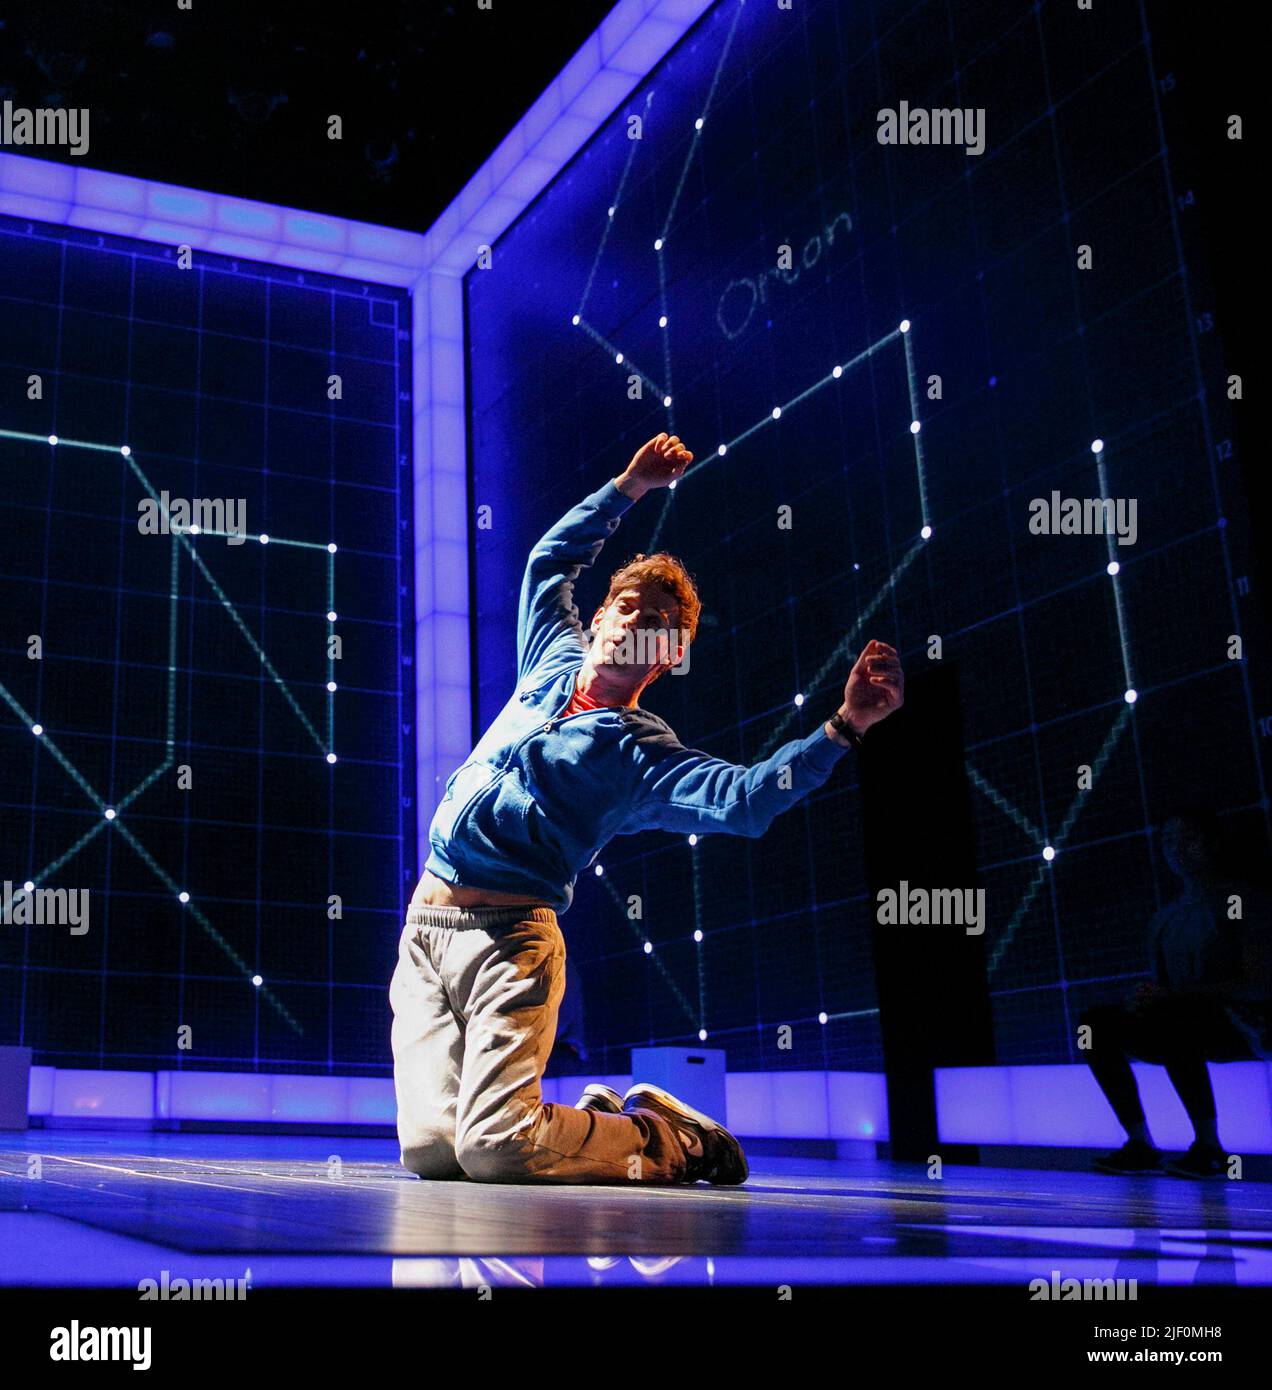 Astro Boy: Luke Treadaway (Christopher Boone) in THE CURIOUS INCIDENT OF THE DOG IN THE NIGHT-TIME by Simon Stephens at the Apollo Theatre, London W1  12/03/2013  a National Theatre production  adapted from the novel by Mark Haddon  design: Bunny Christie  lighting: Paule Constable  video design: Finn Ross  director: Marianne Elliott Stock Photo